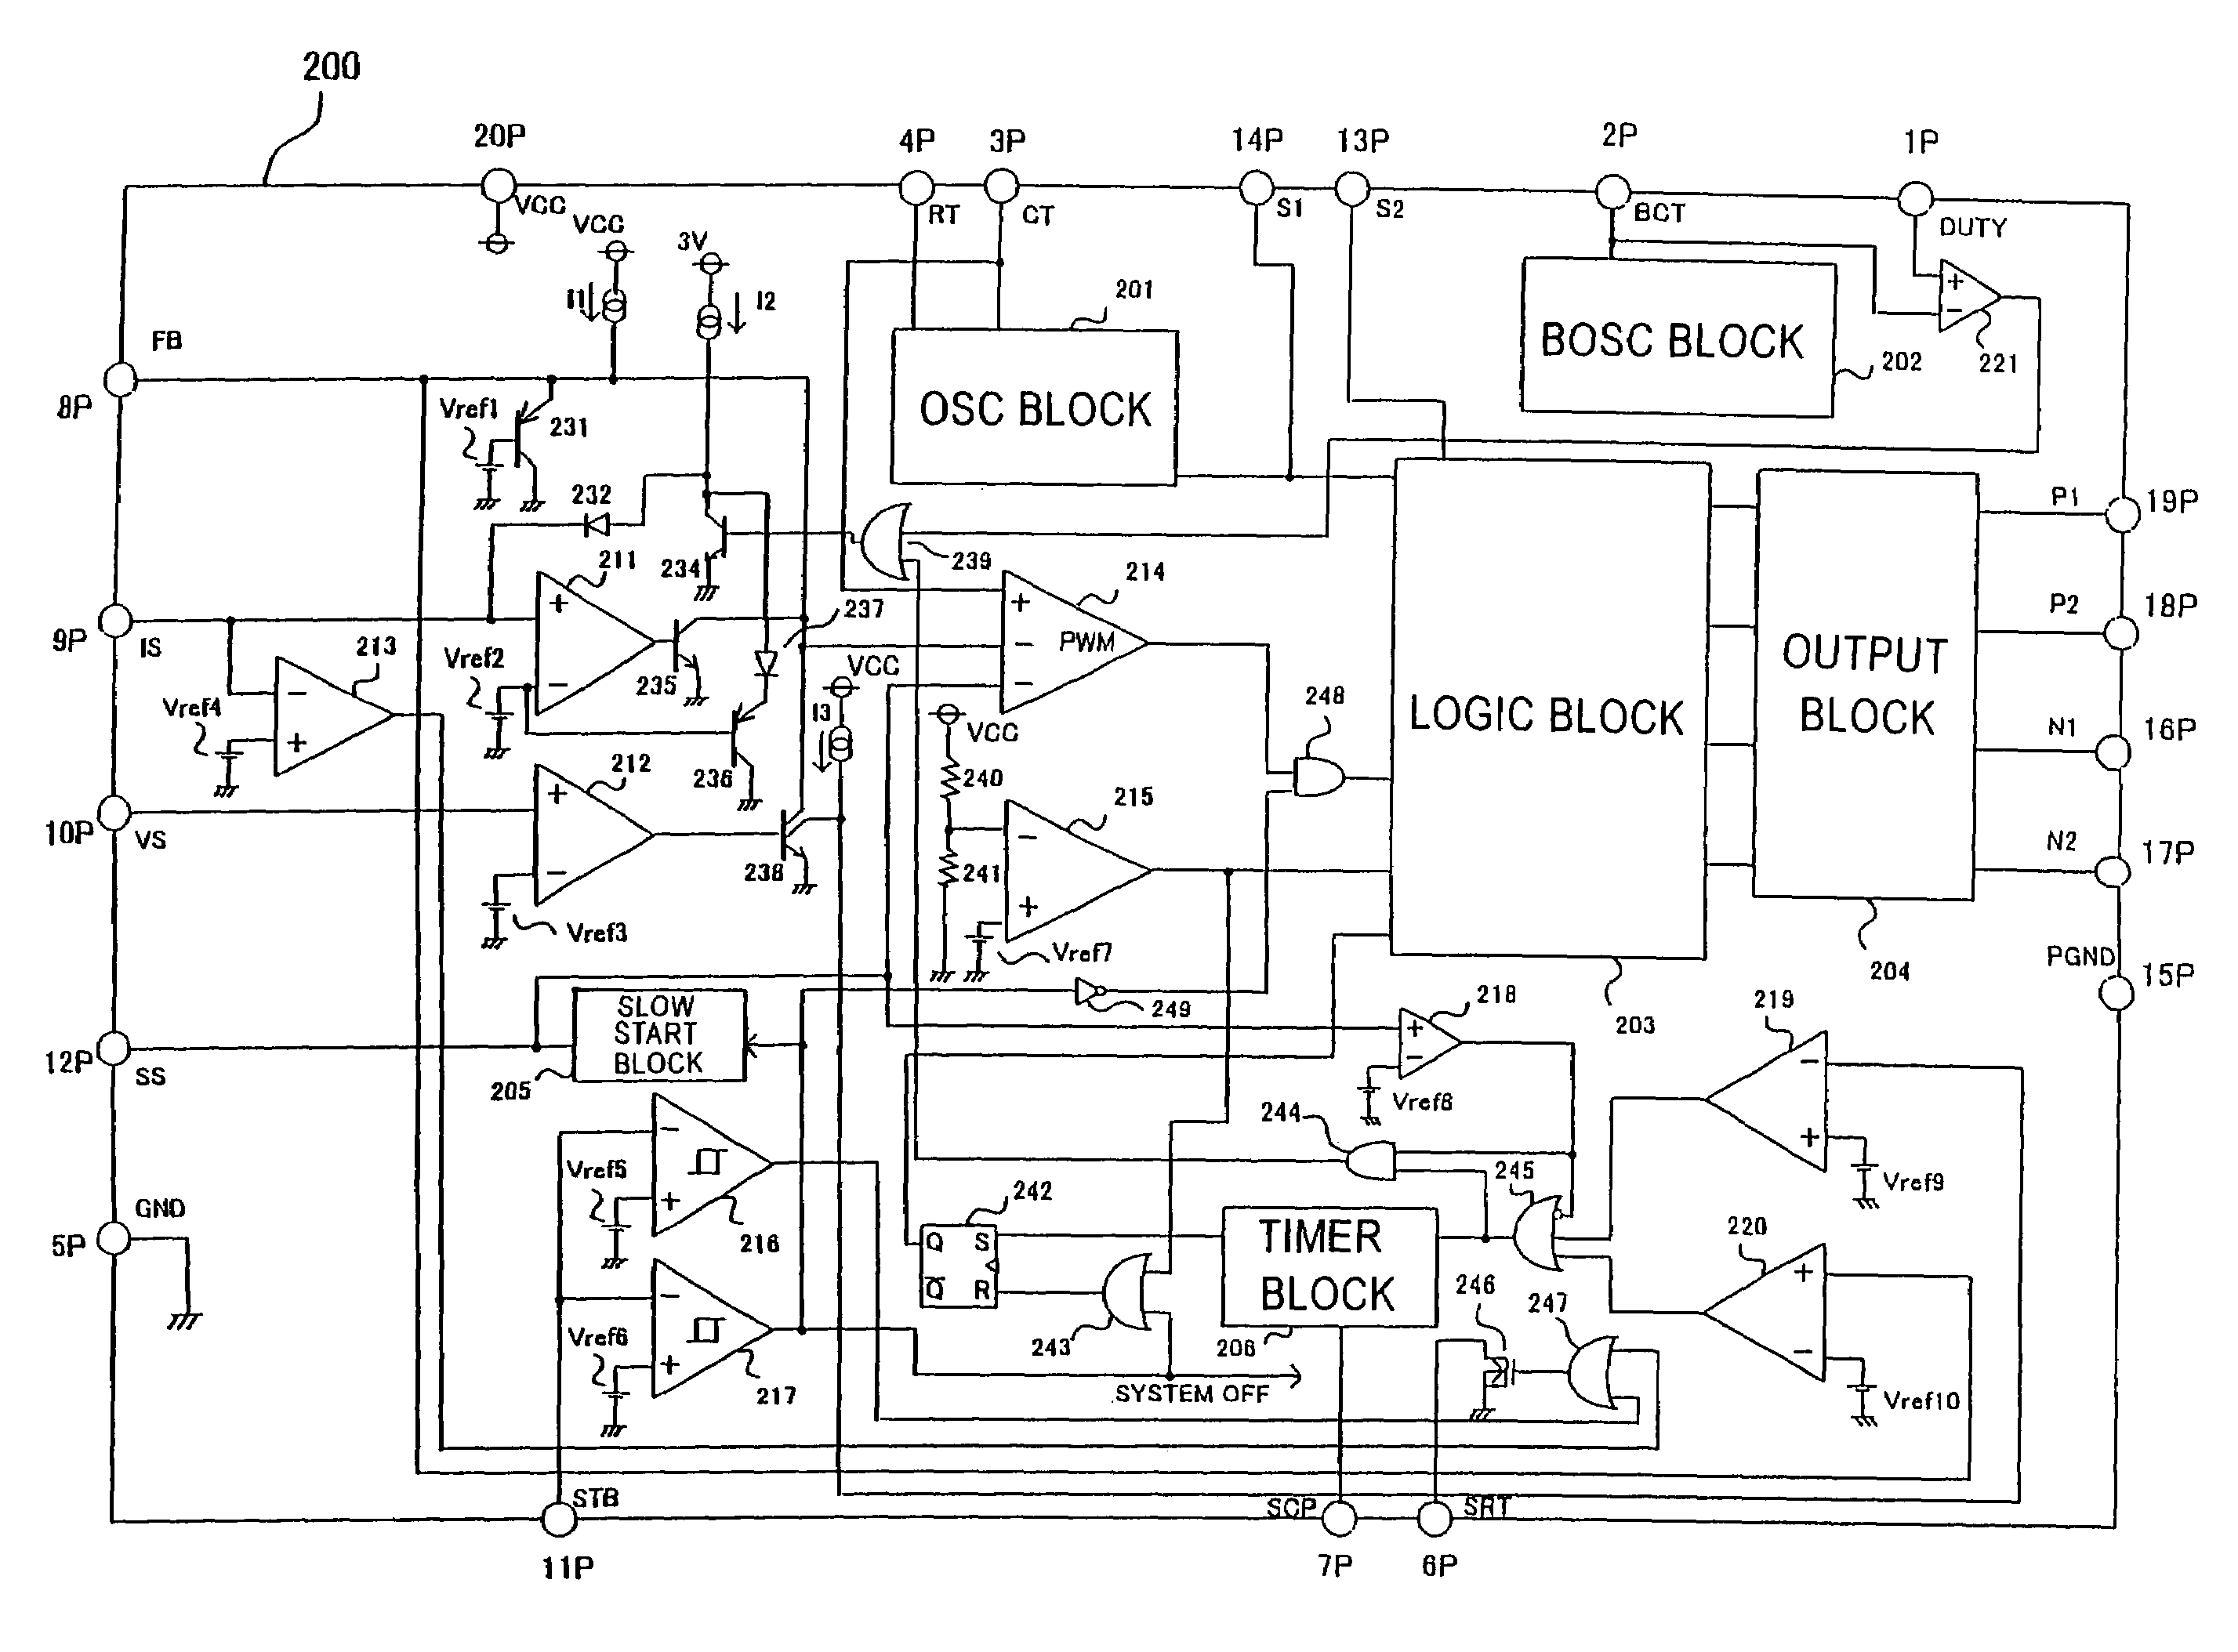 DC/AC converter and its controller IC